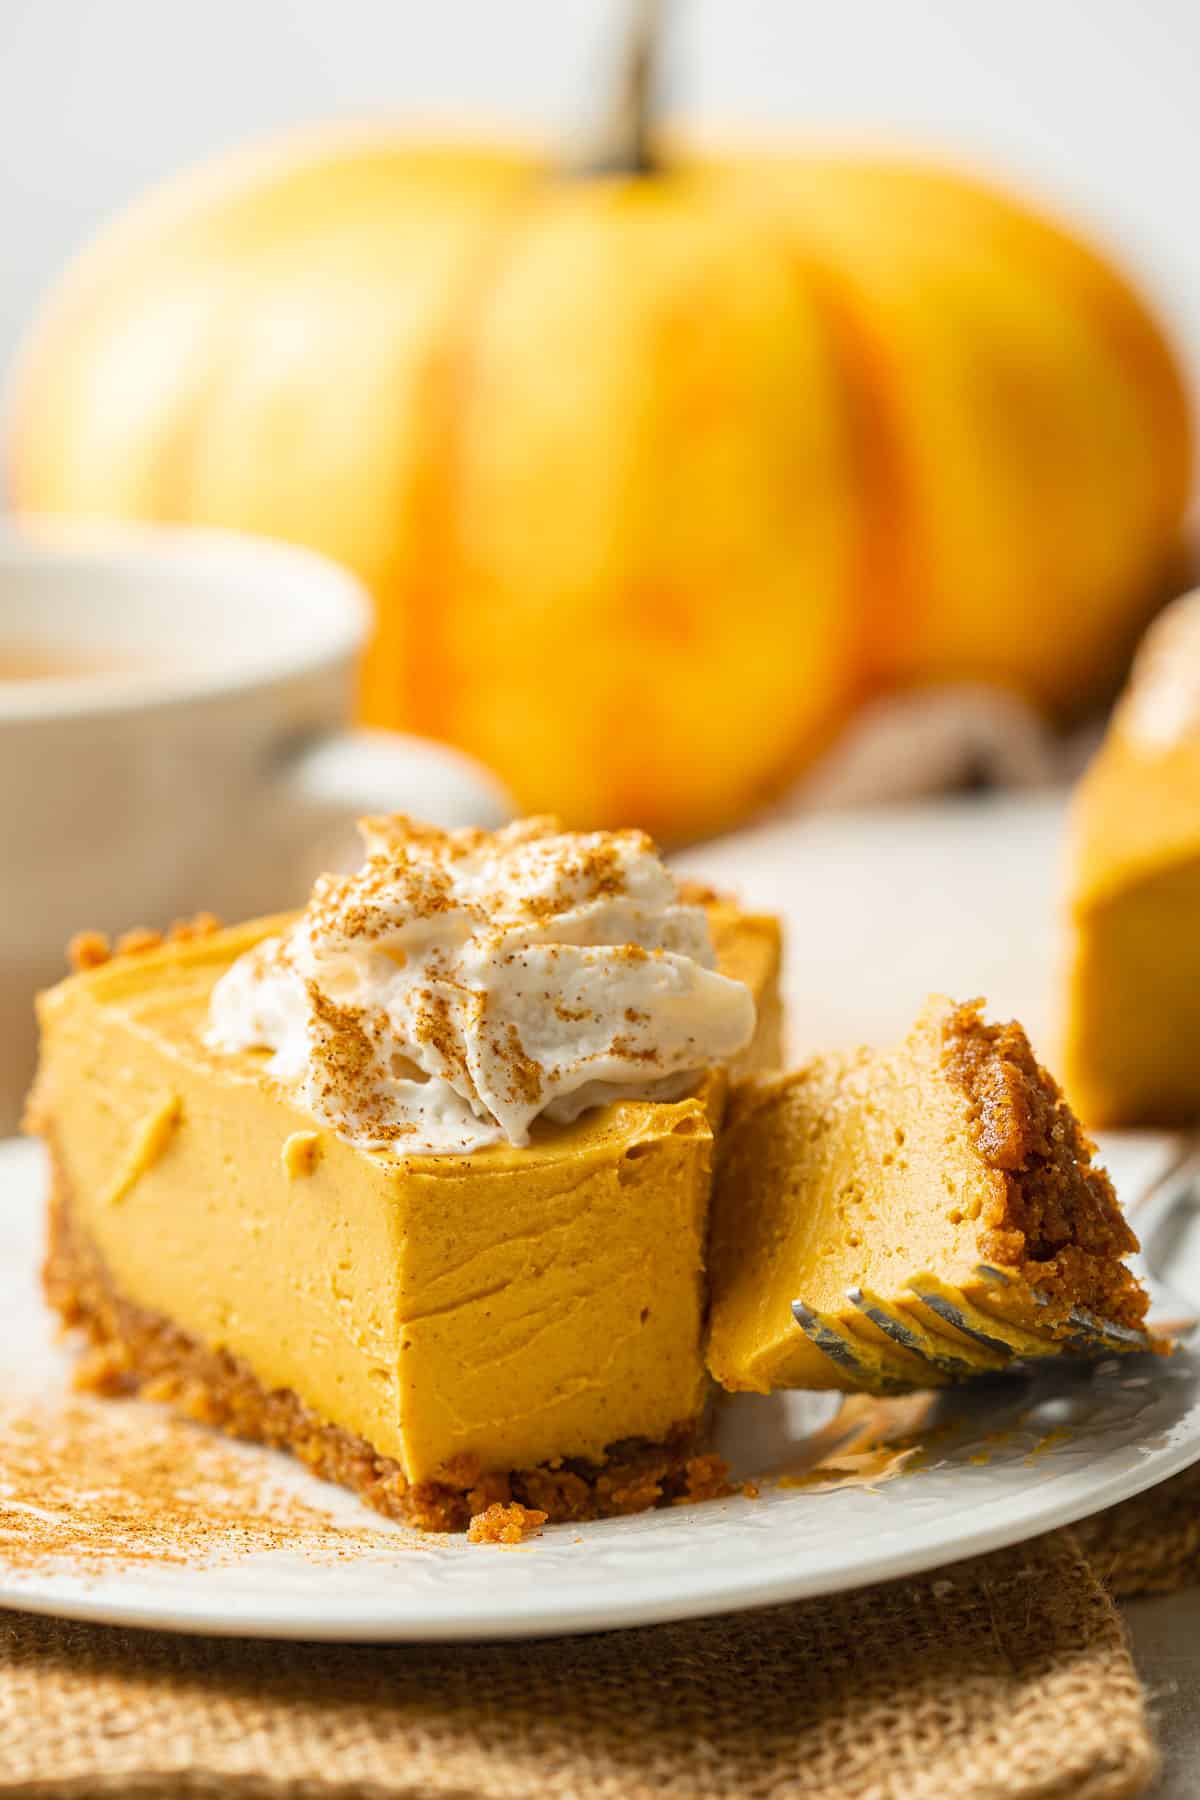 Slice of Vegan Pumpkin Cheesecake on a dish with the tip cut off and resting on a fork.